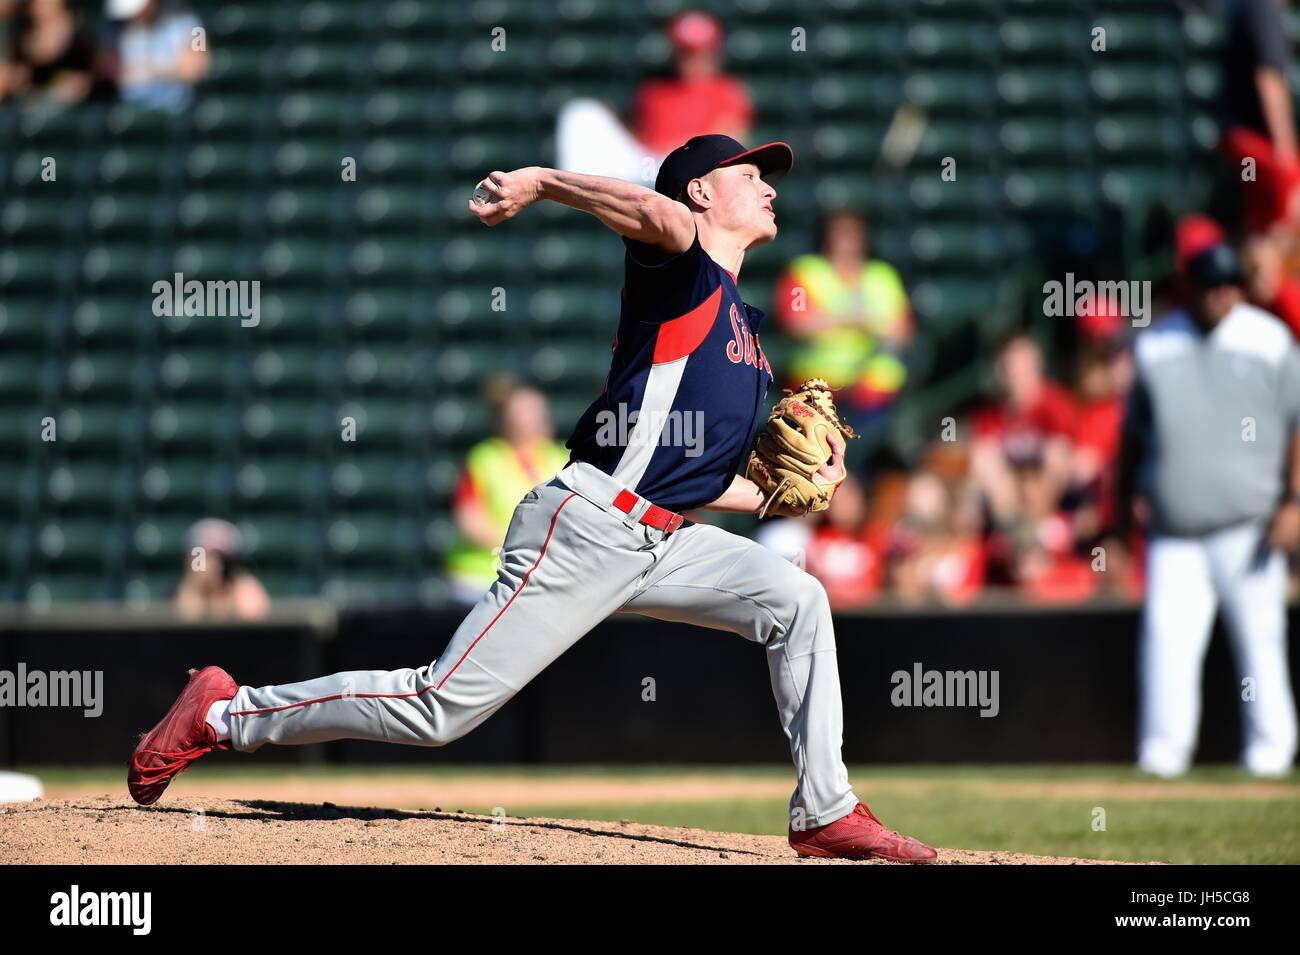 Pitcher delivering a pitch to an opposing hitter during a high school baseball game. USA. Stock Photo